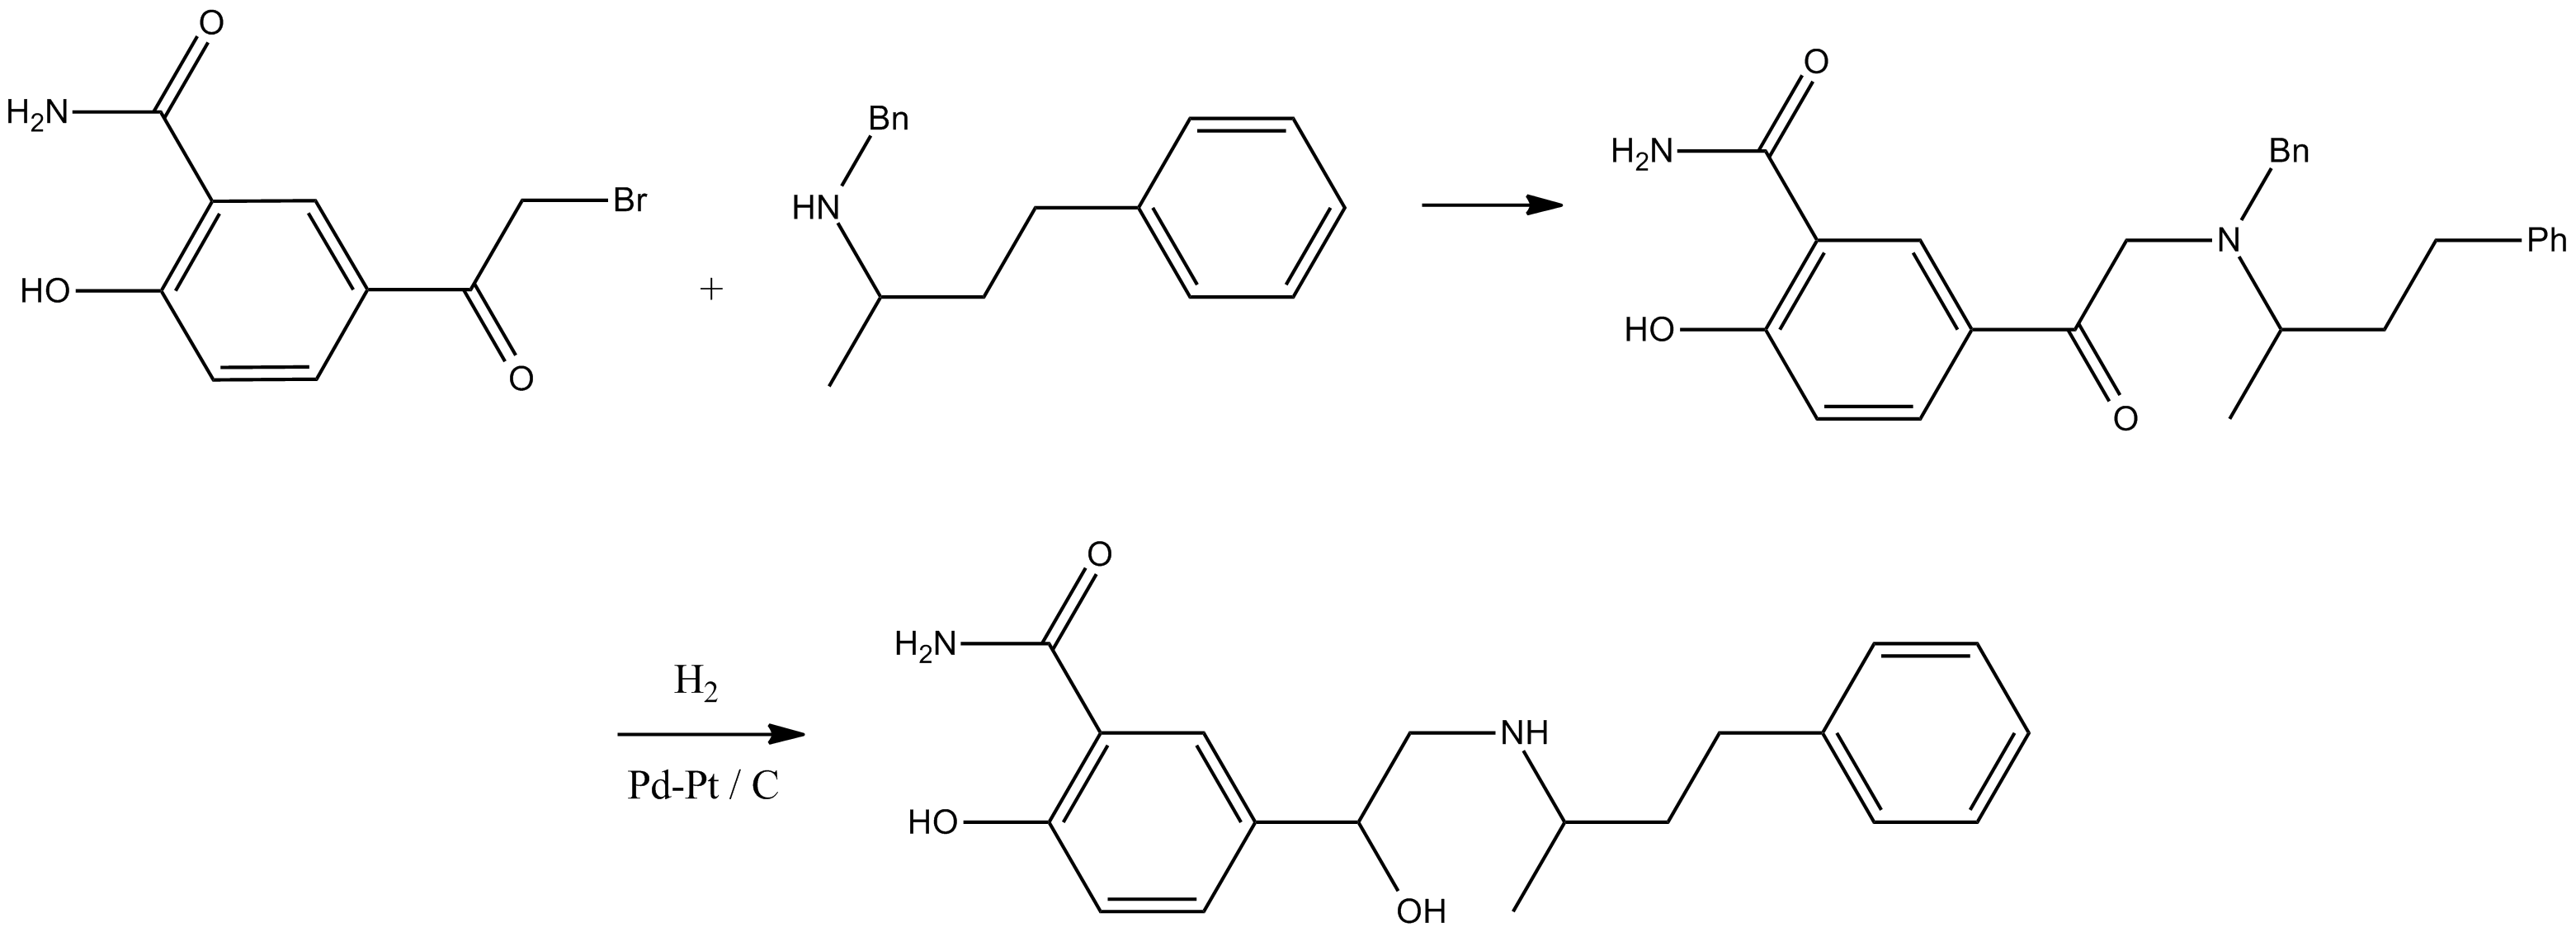 File:538 Divergent synthesis.